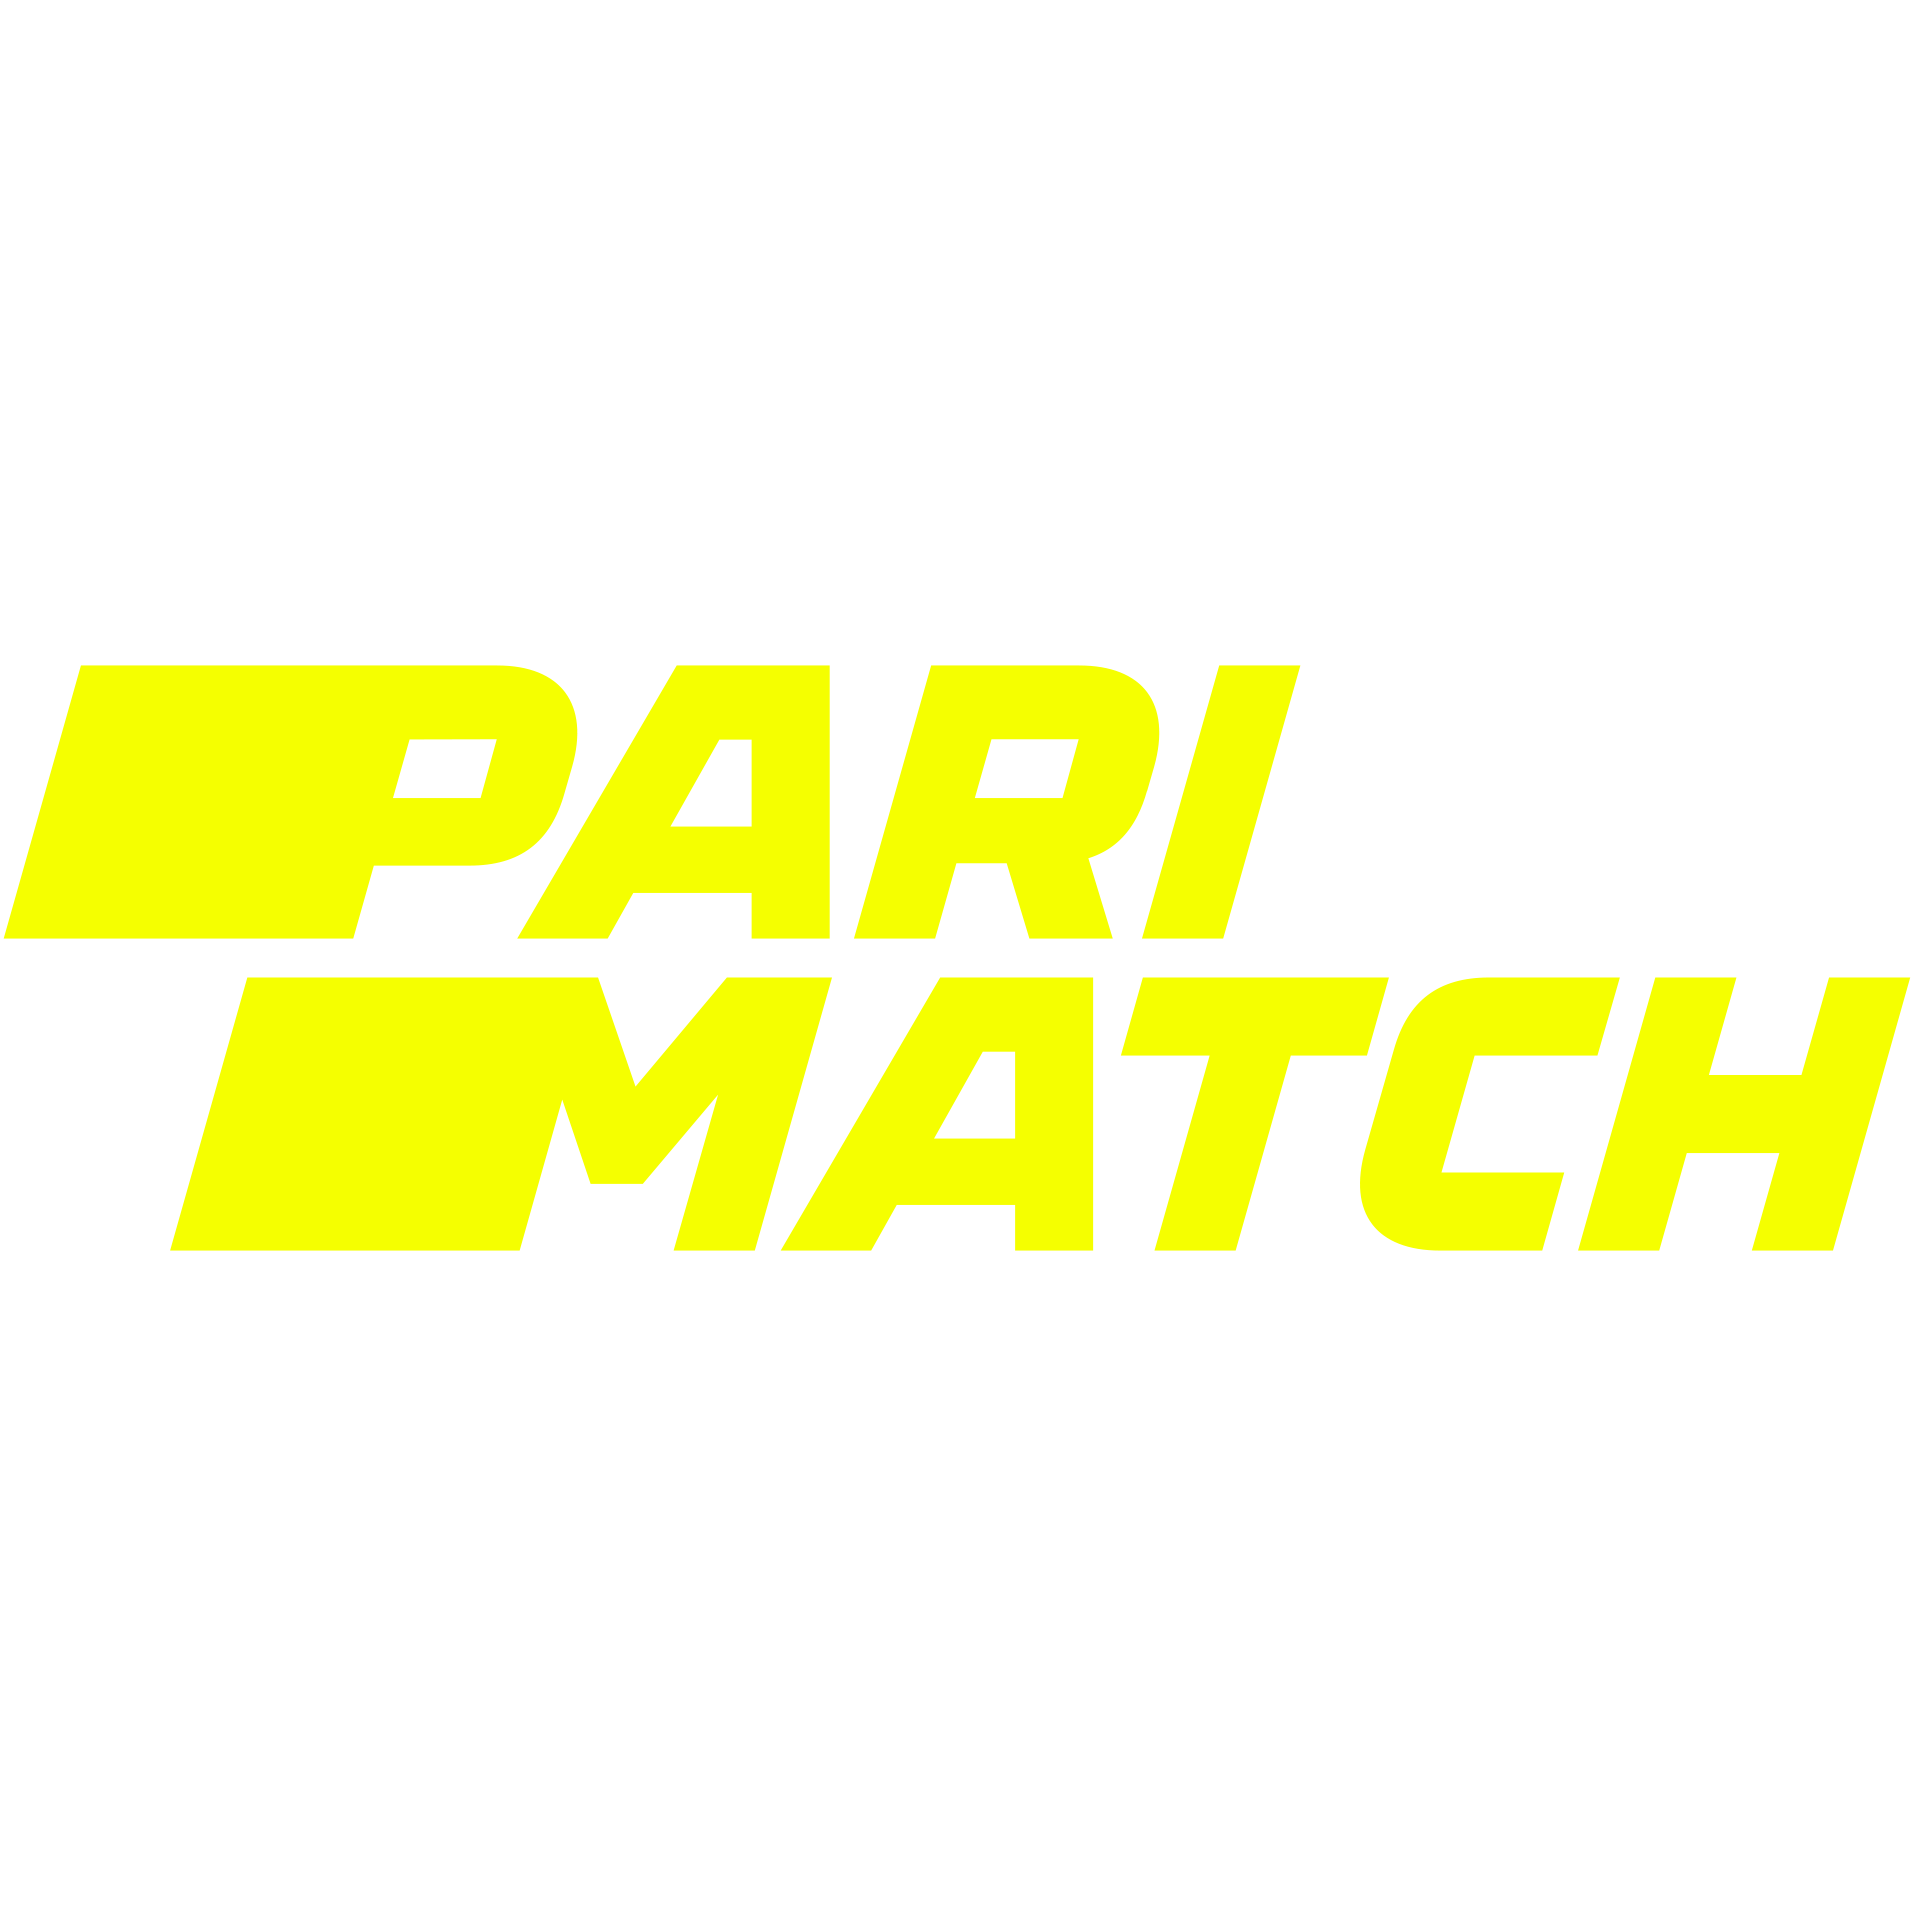 Sign up for Parimatch and start betting on cricket legally in India.